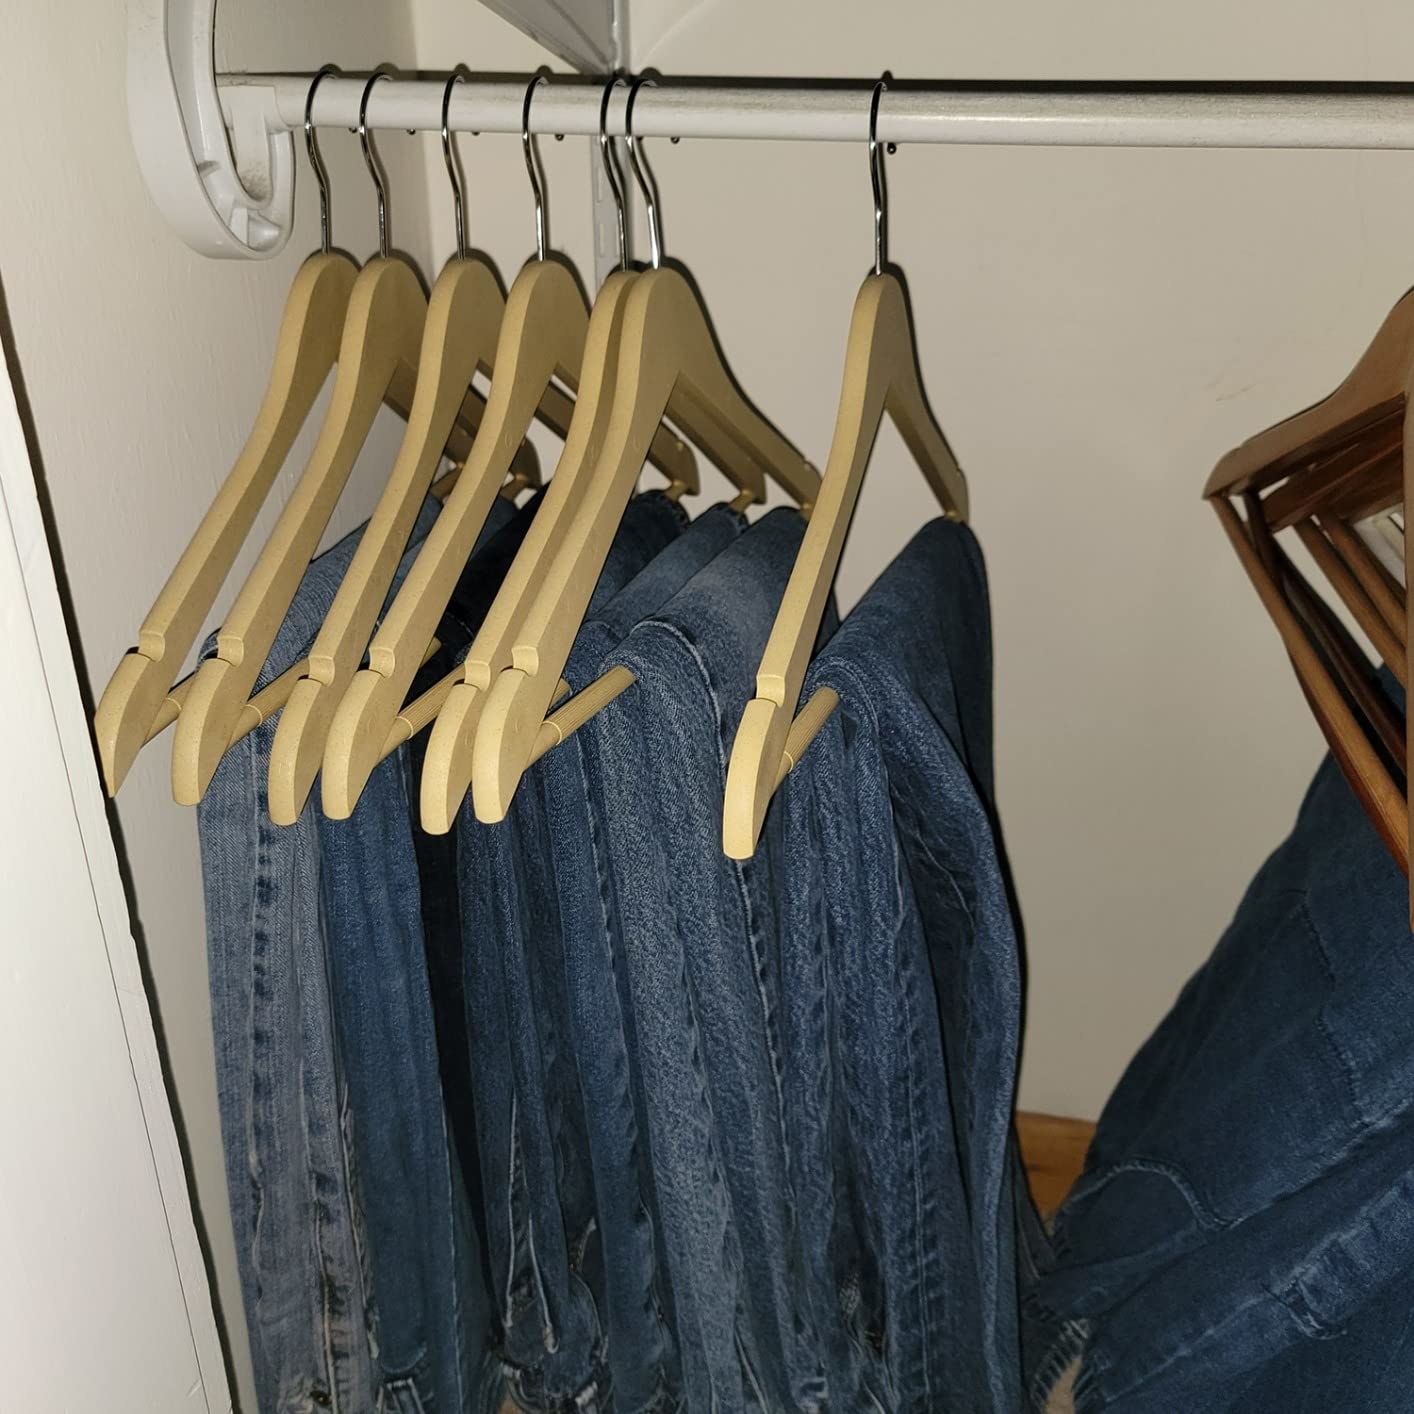 Jeans hanging on hangers